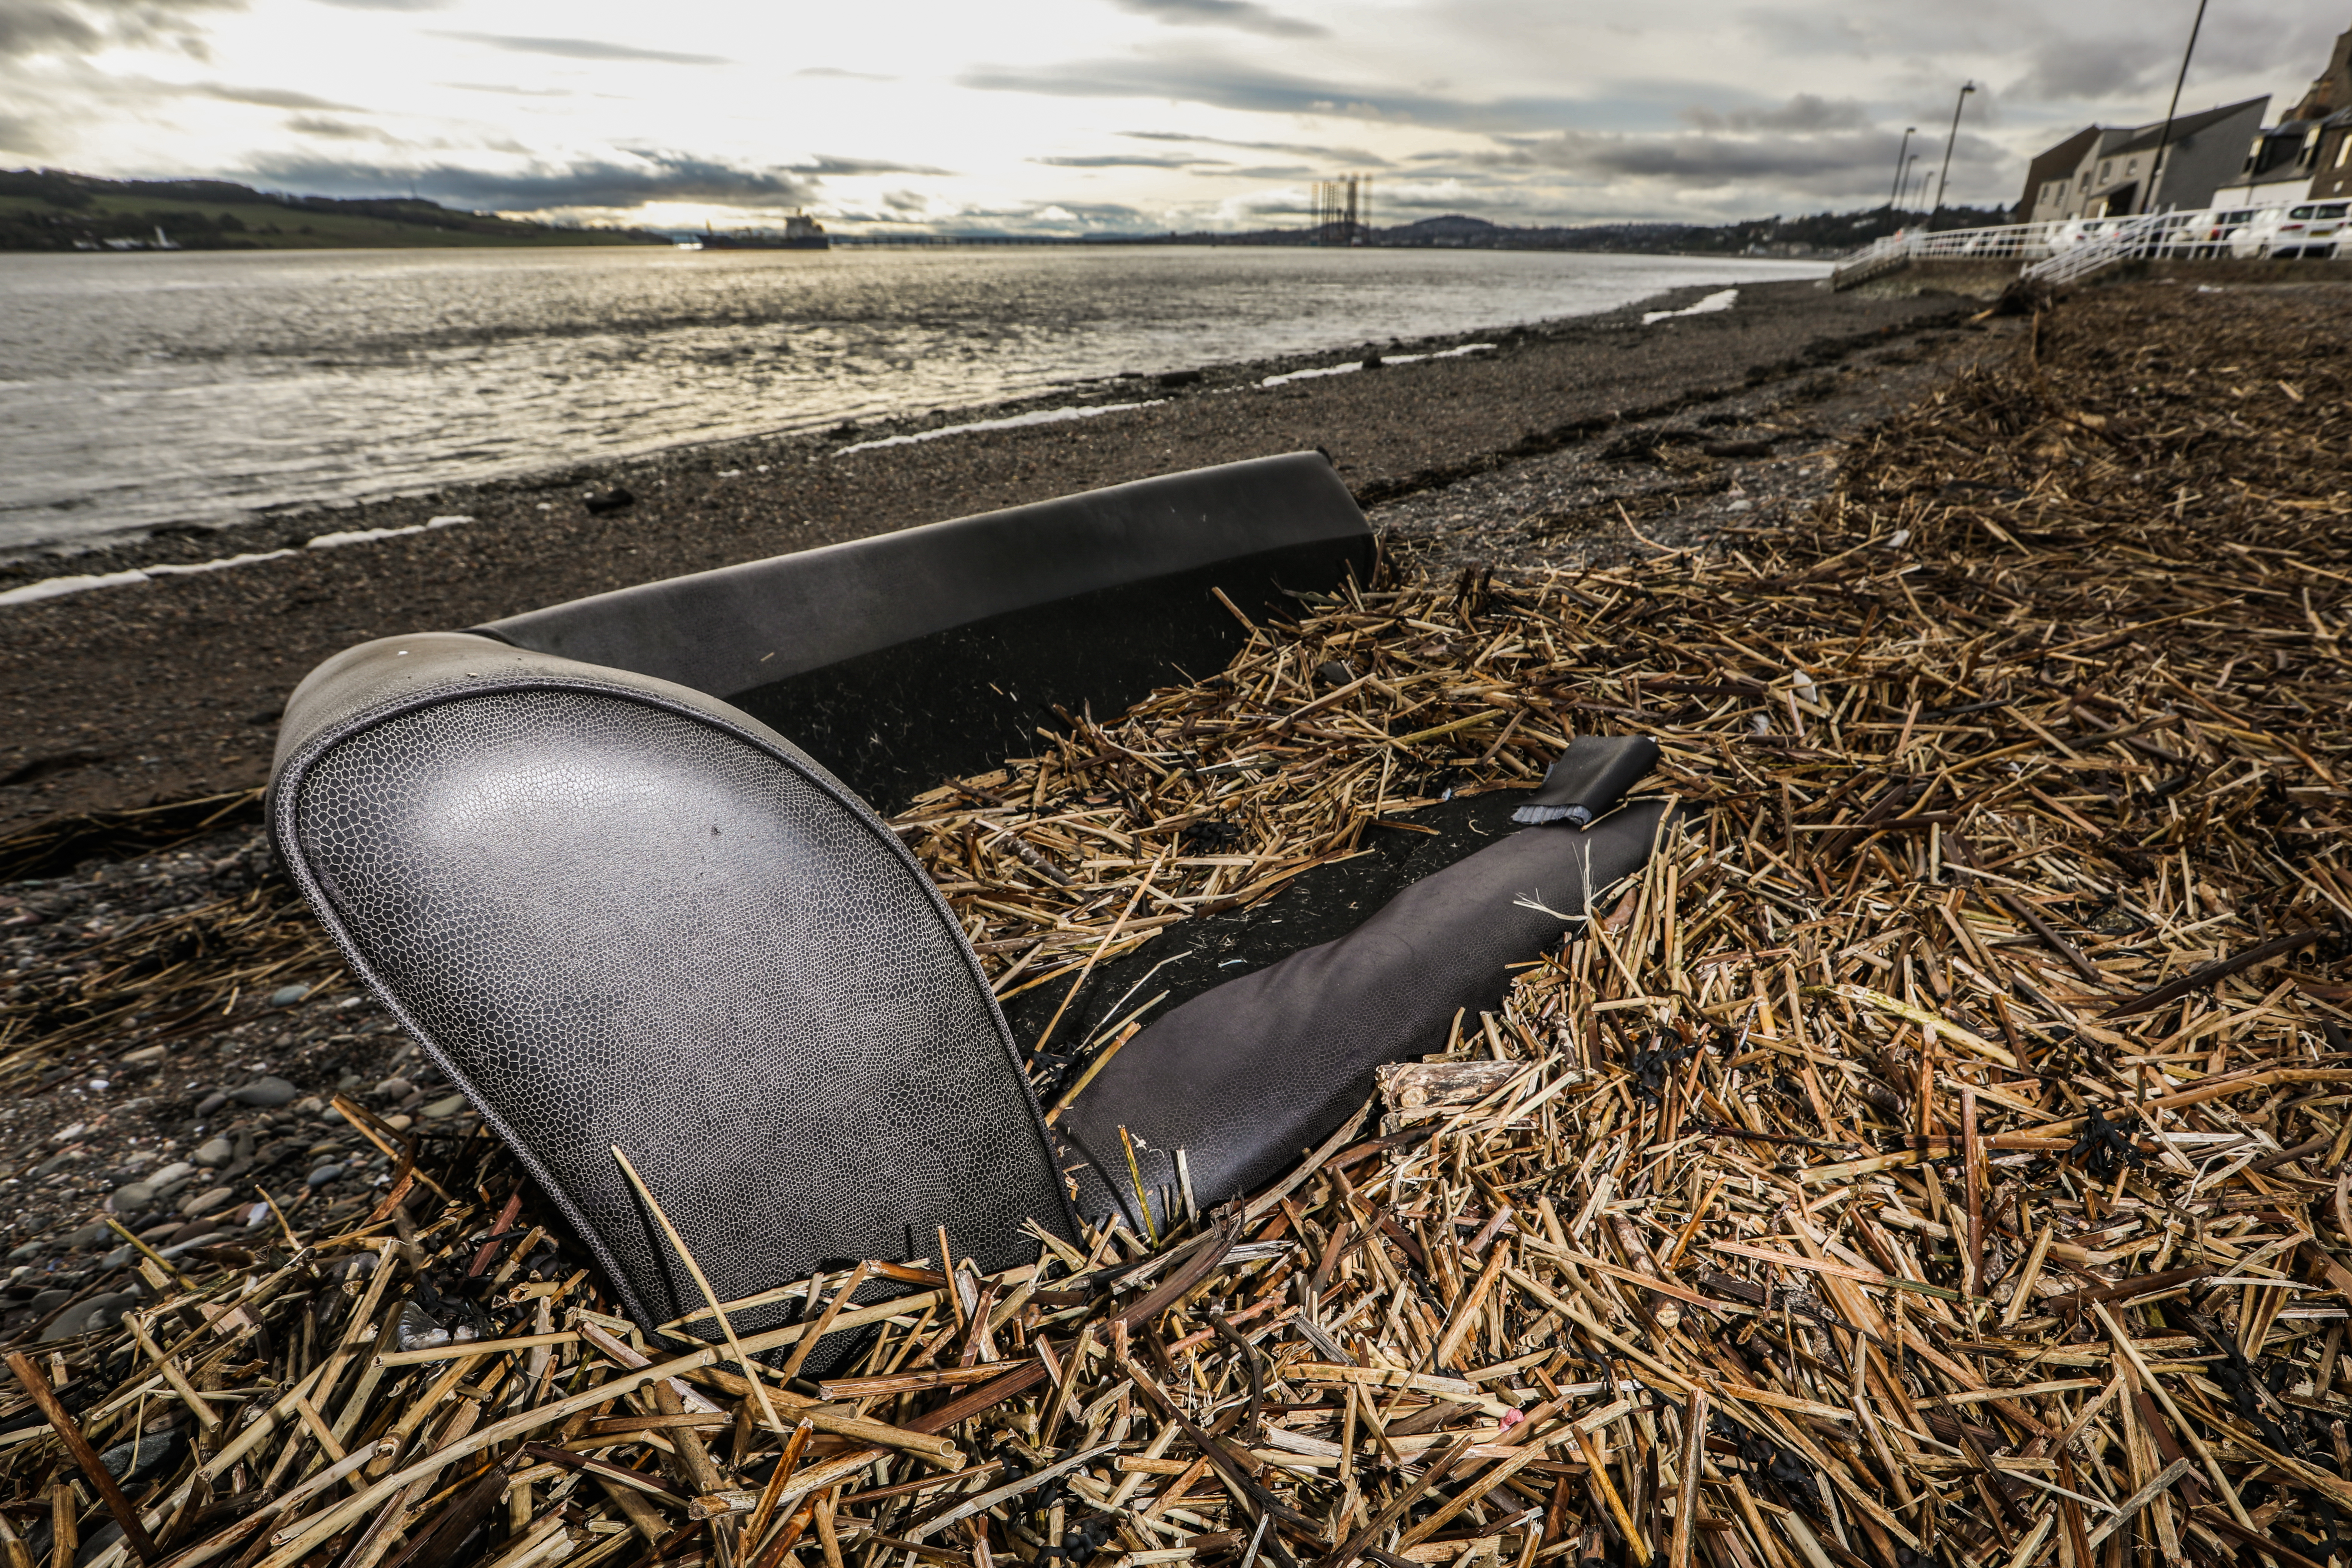 A sofa washed up on the beach at Broughty Ferry is just one example of fly tipping in recent weeks